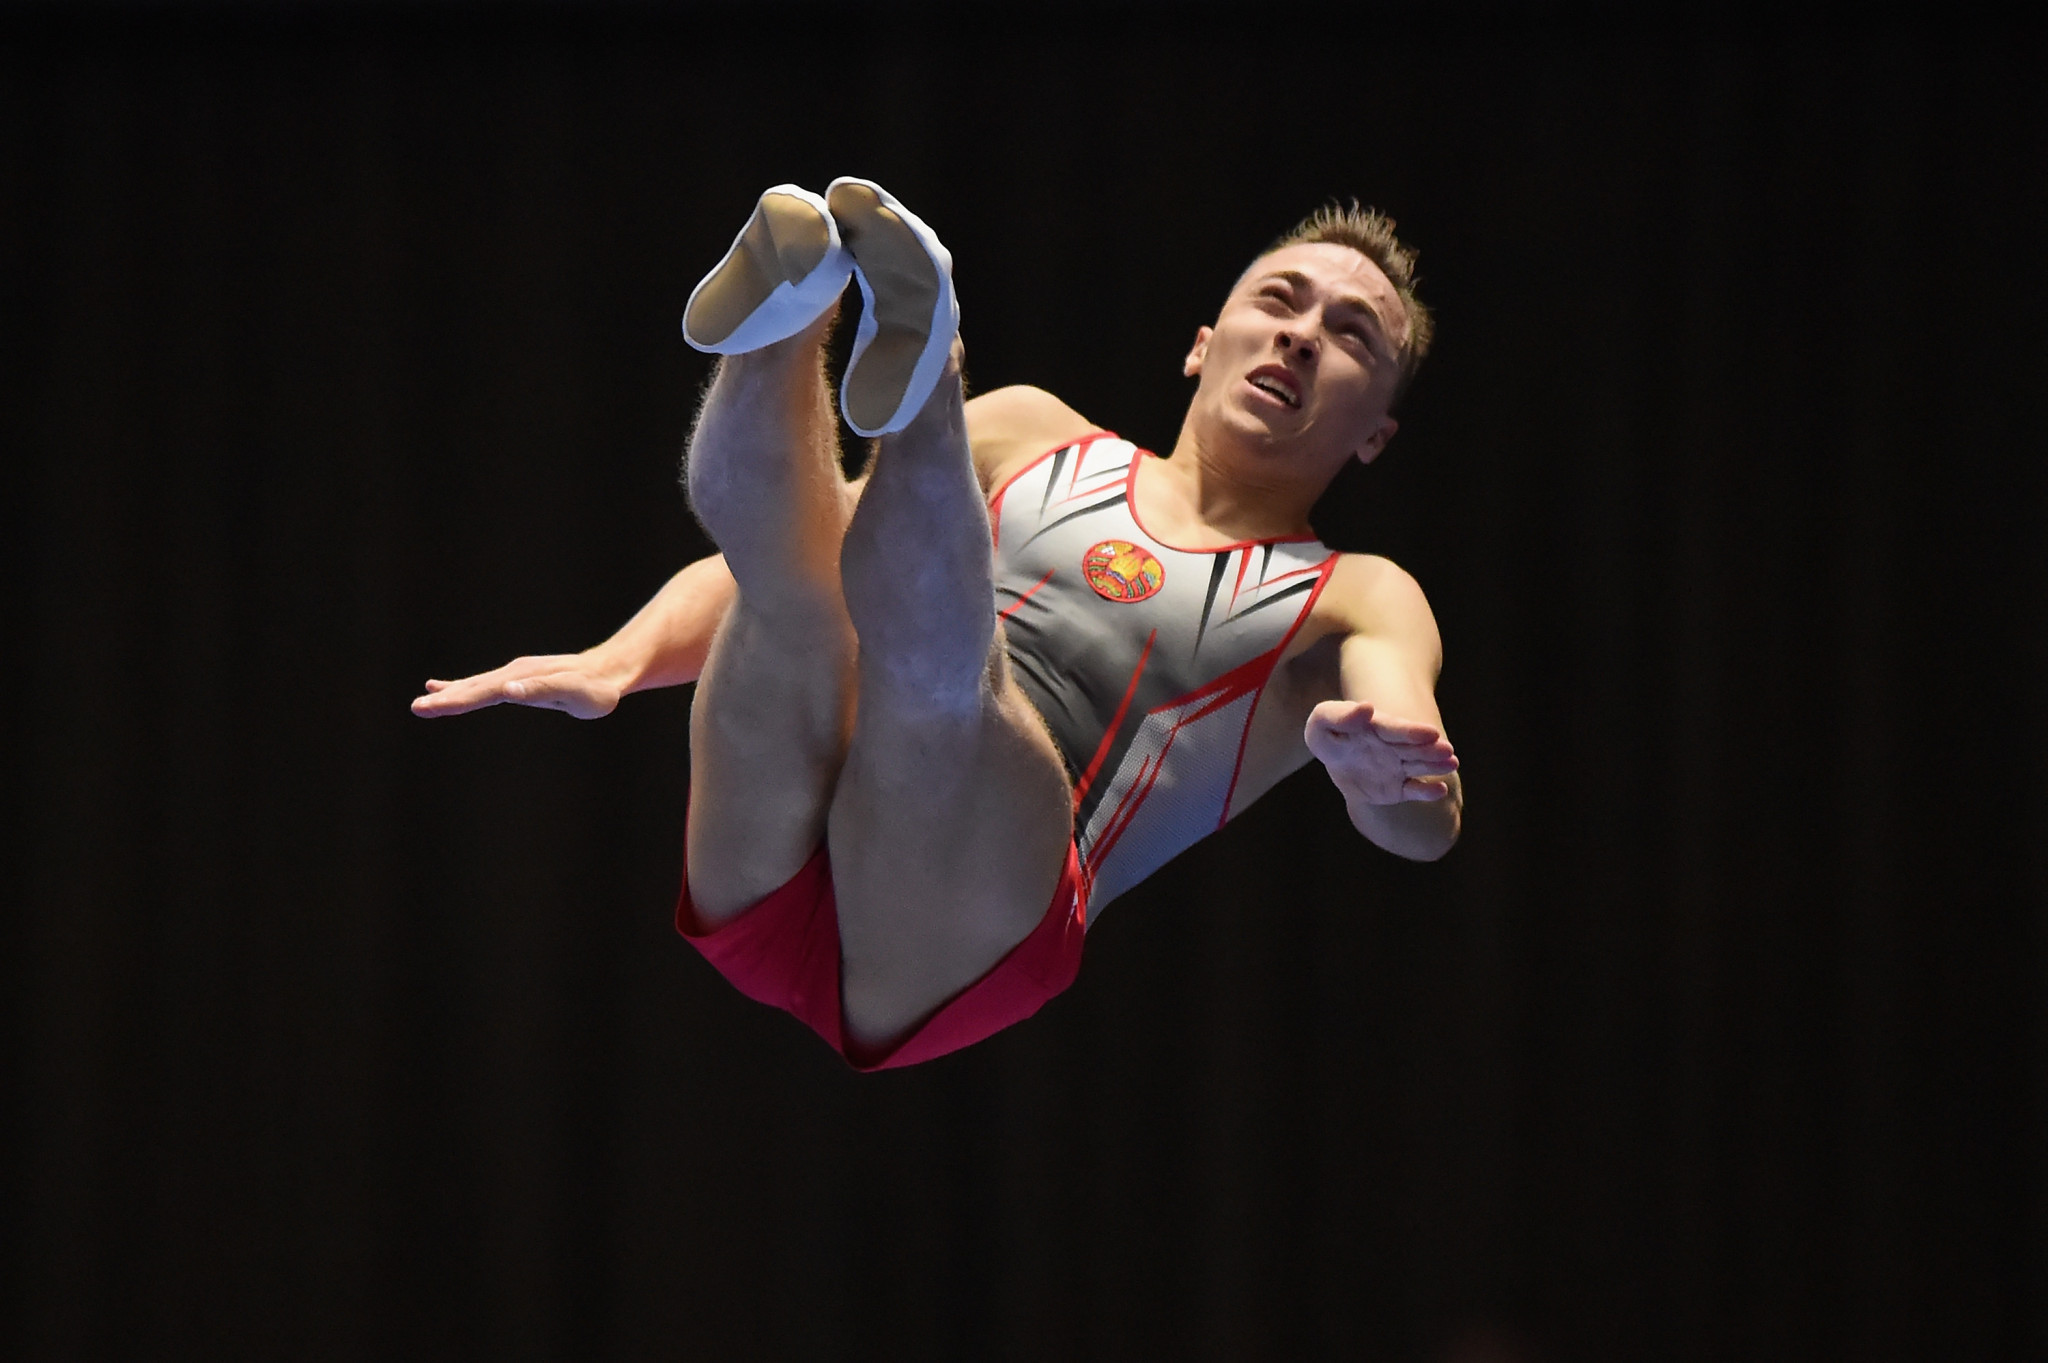 Olympic champion Hancharou tops men's qualifying at FIG Trampoline World Cup in Baku